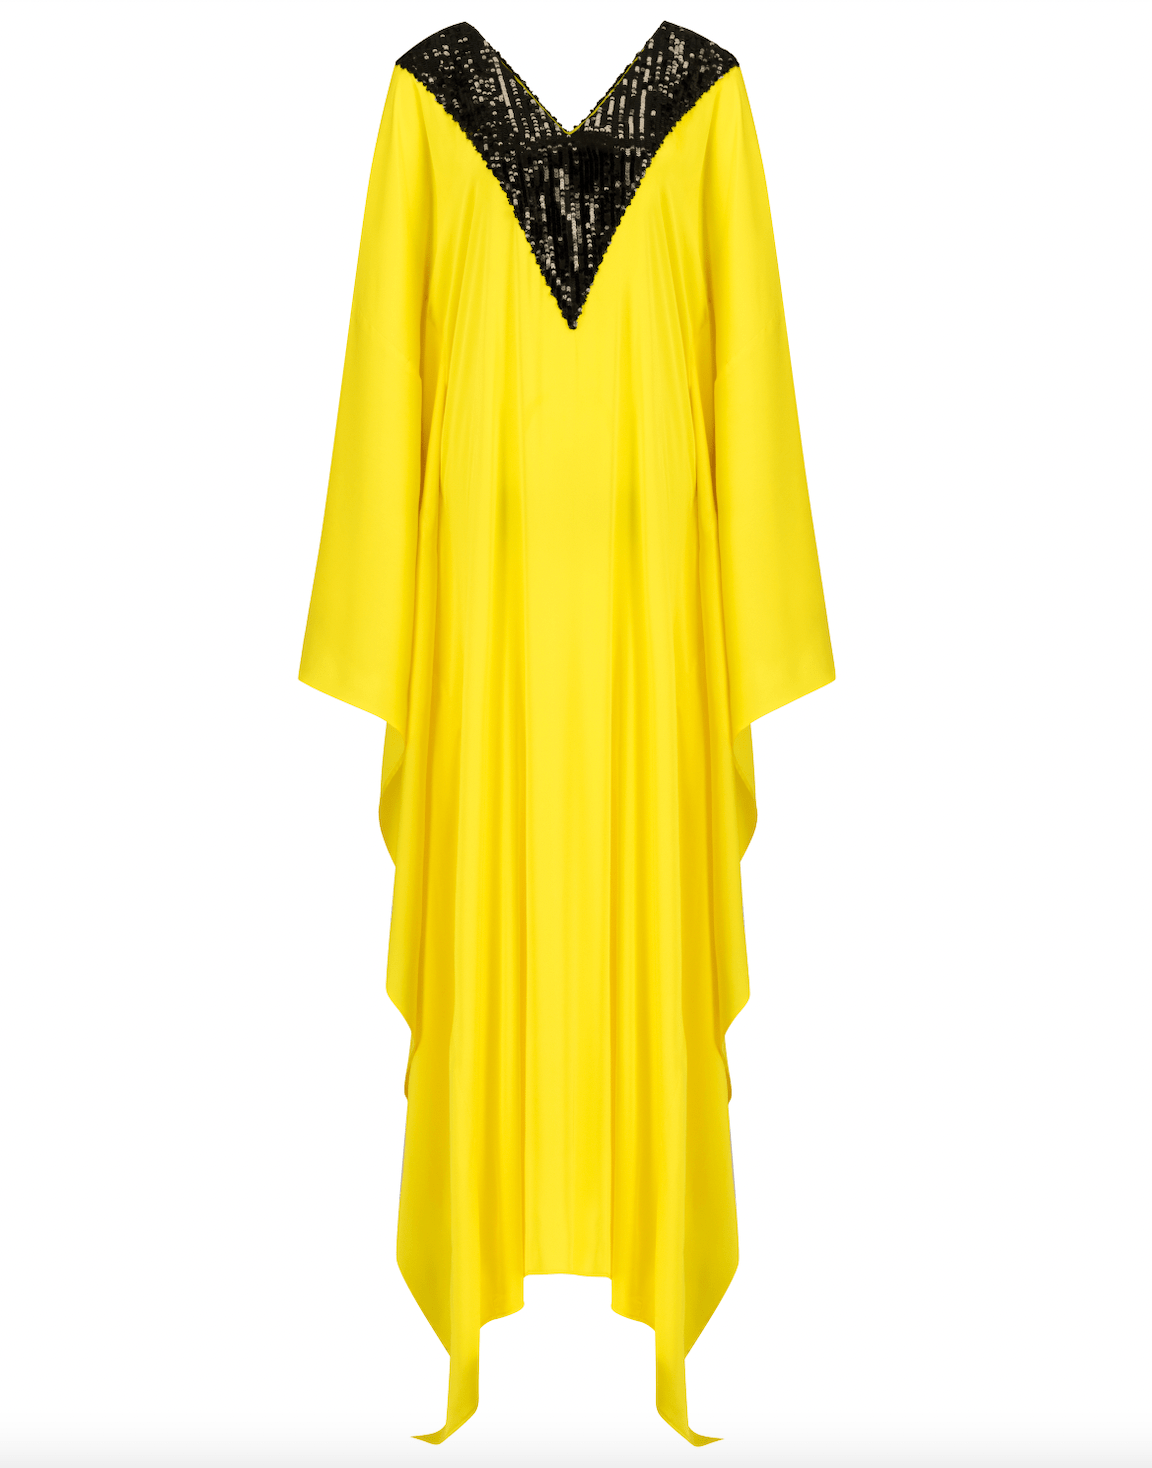 TAIRA HER Silk Yellow and Black V Neck Sequin Dress REC1468